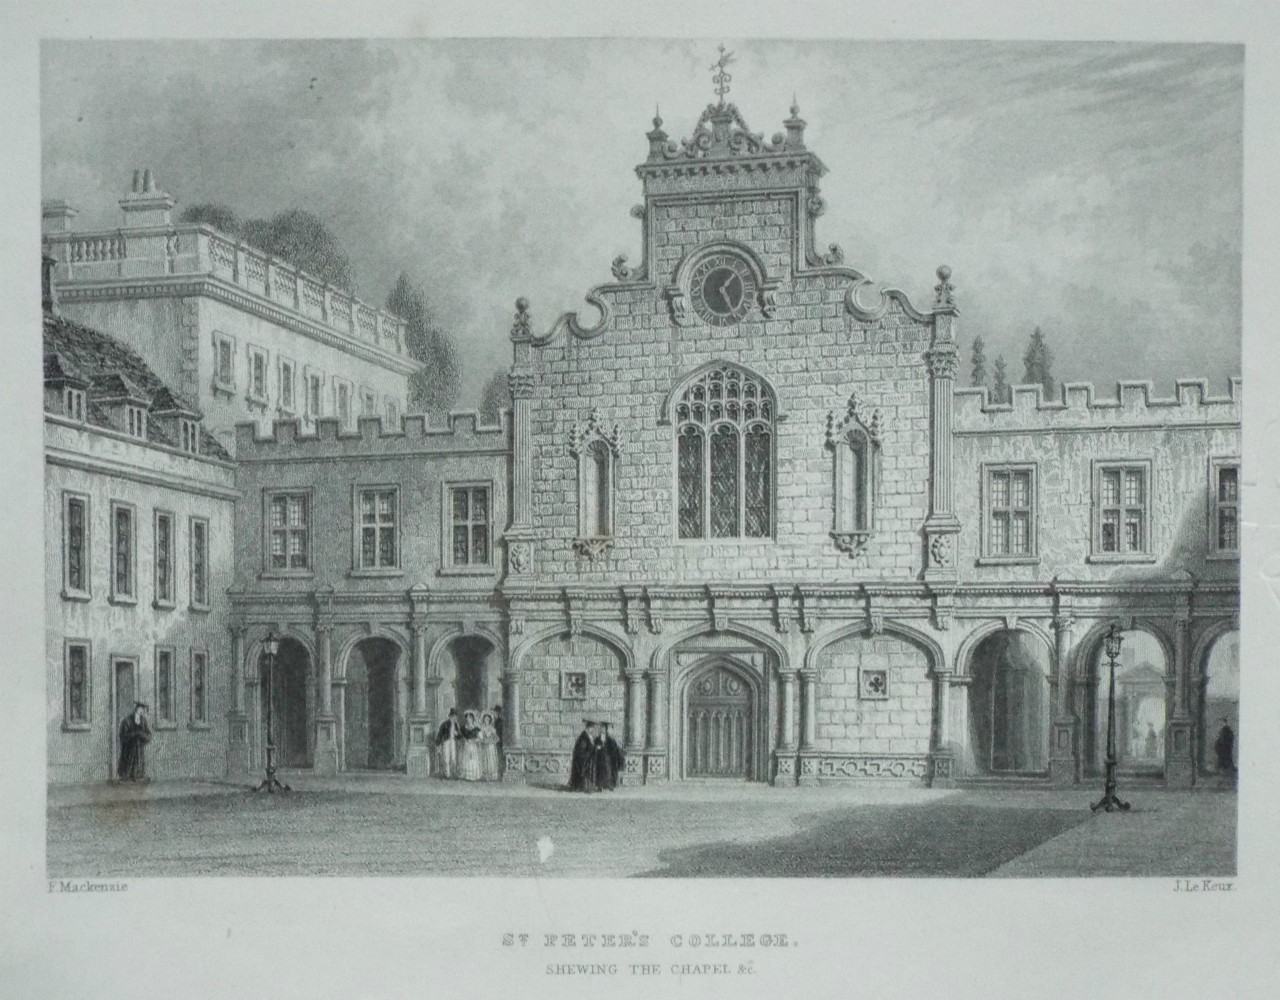 Print - St. Peter's College, shewing the Chapel &c. - Le